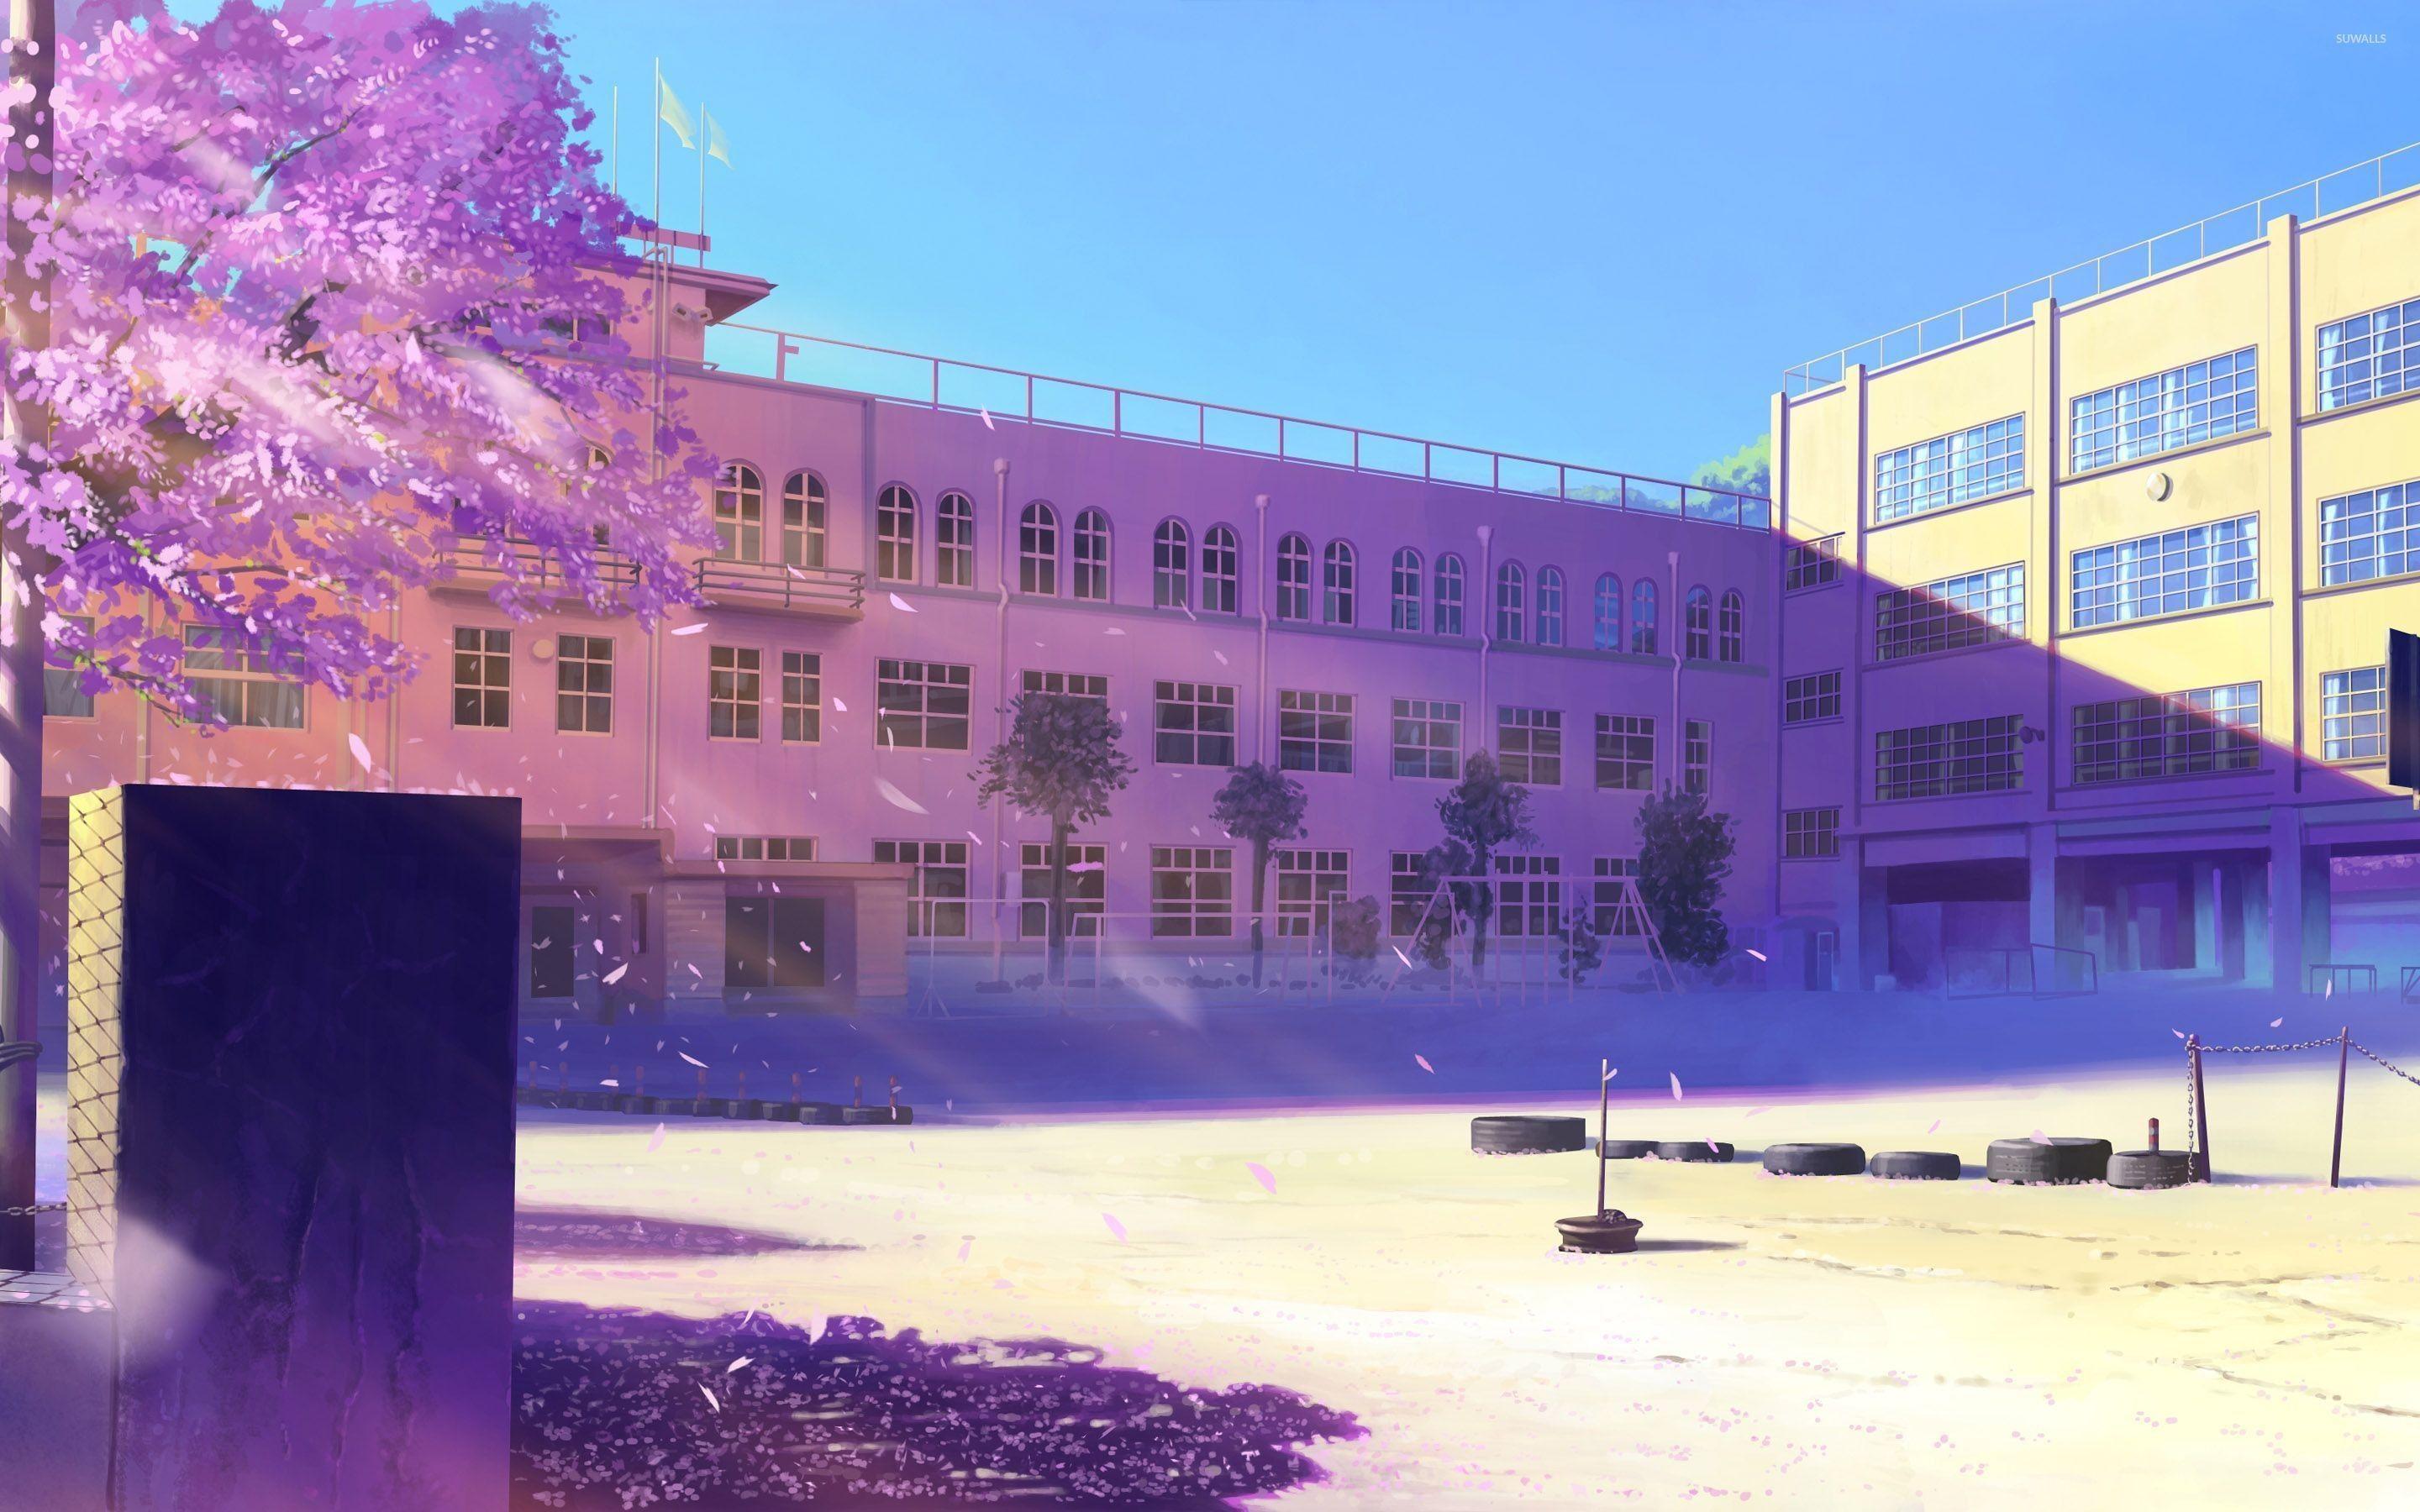 Anime School Background Stock Photos and Images - 123RF